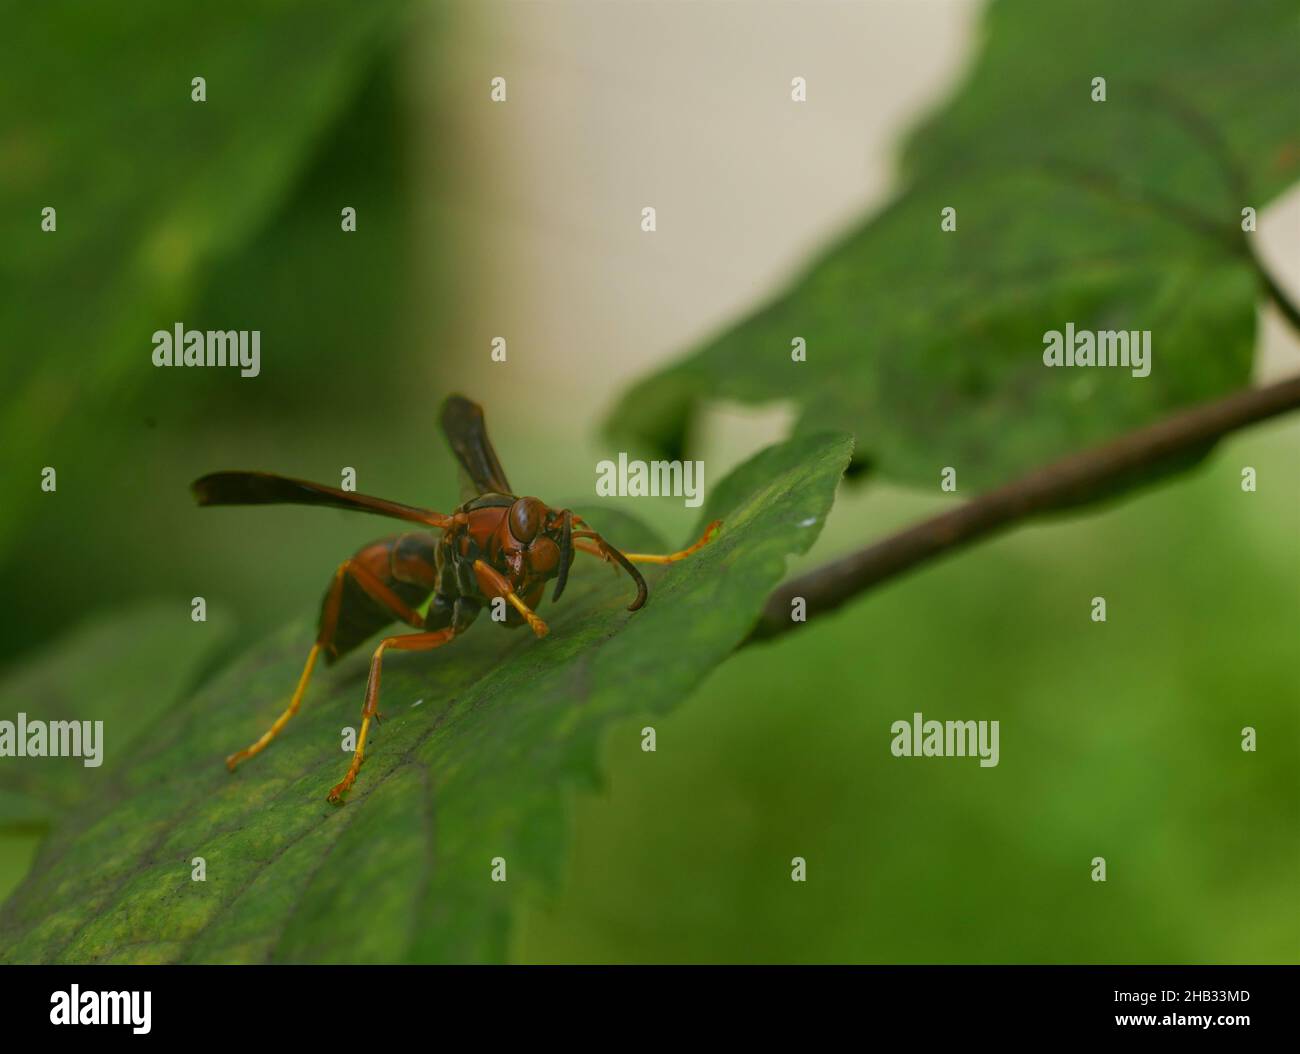 Paper wasp. Scientific name: Polistes Gallicus. Sitting on a green leaf. Stock Photo